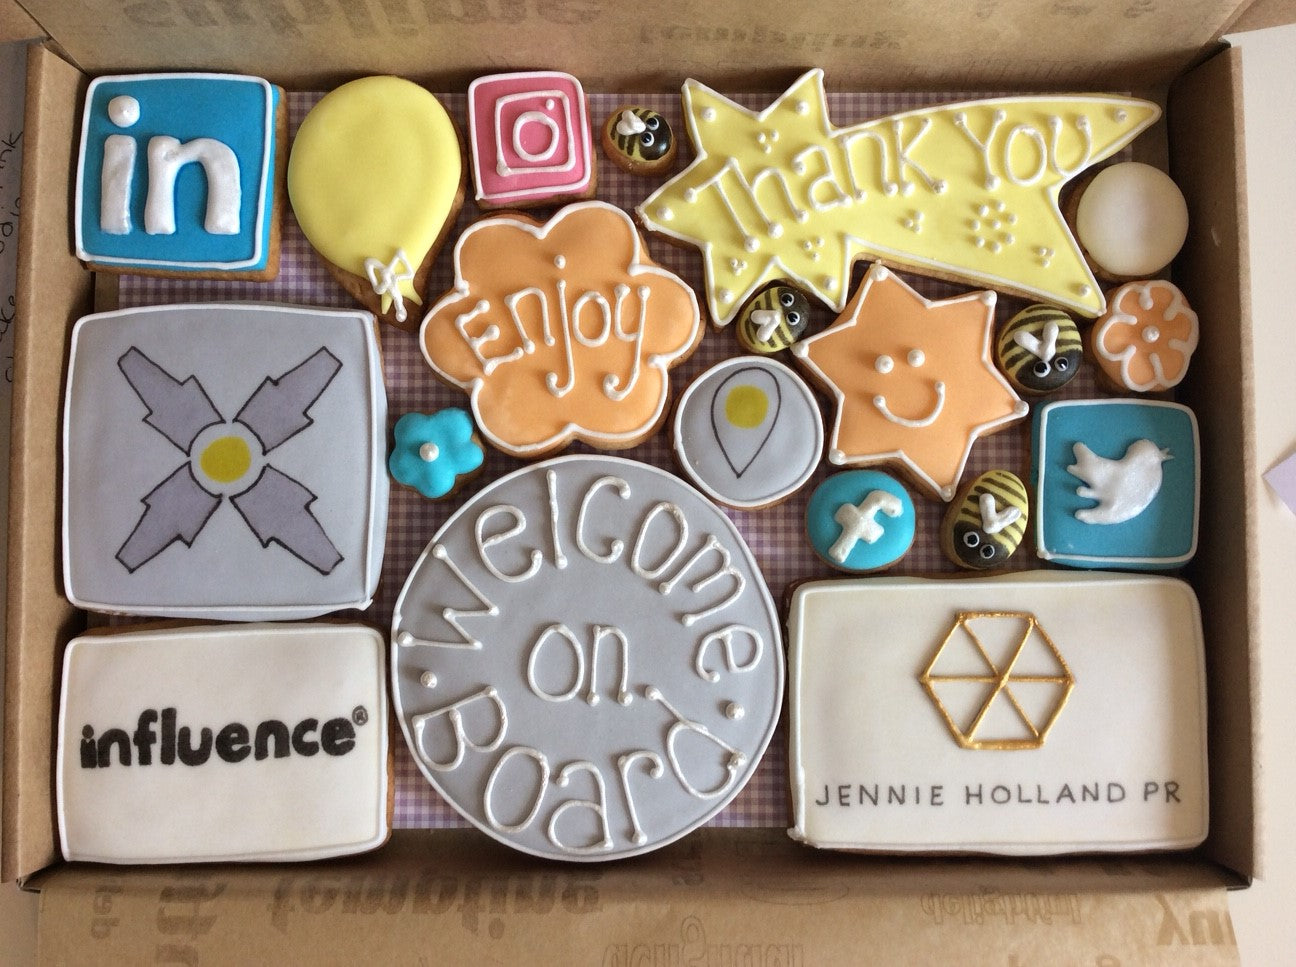 Welcome on board - Bespoke Corporate Cookie Box (Large)